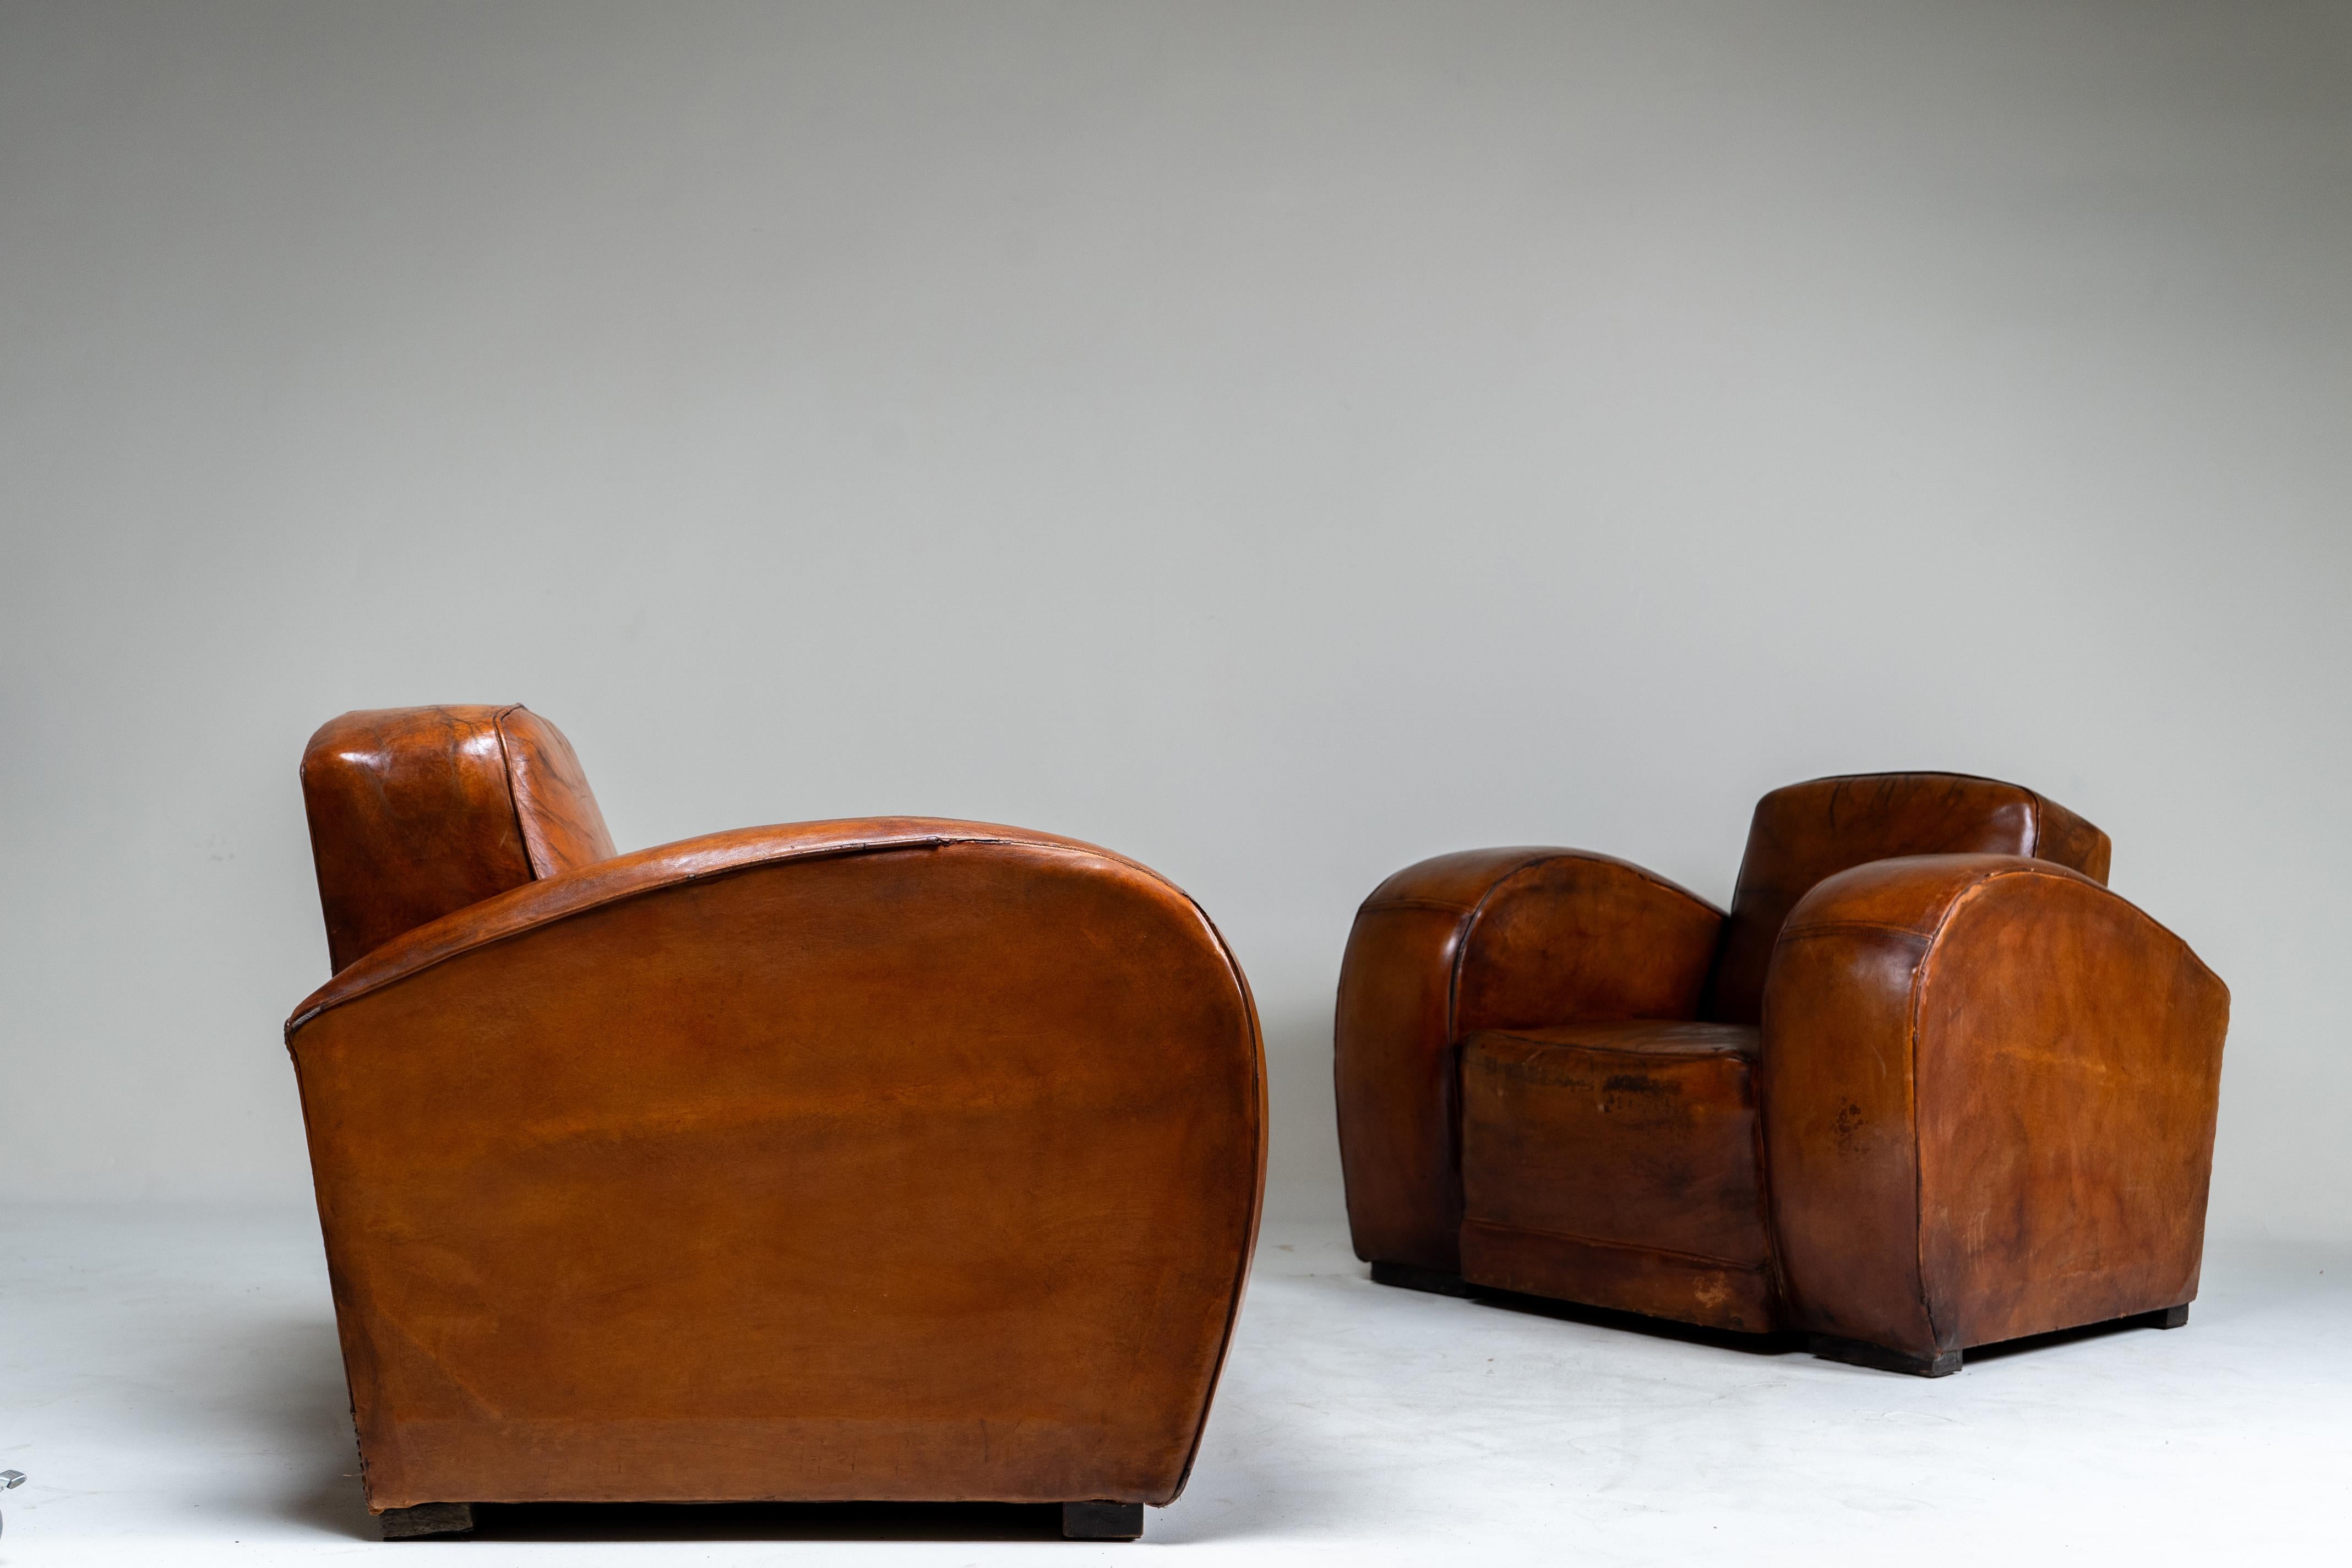 A Pair of Art Deco Leather Club Chairs, France c.1930 For Sale 9